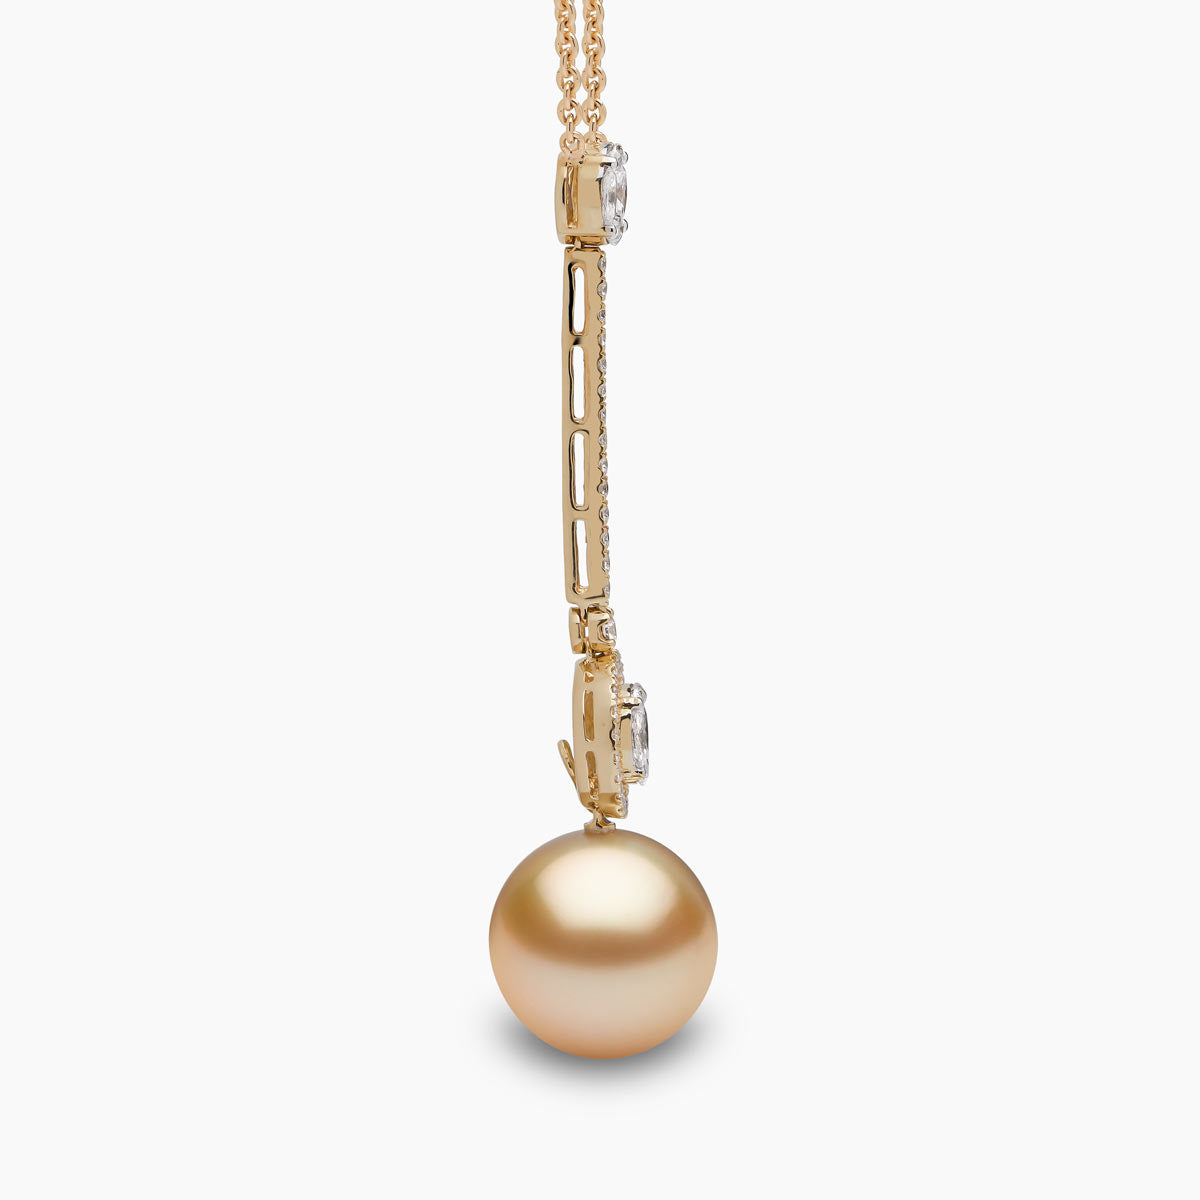 18K Gold Indonesian South Sea Pearl and Diamond Necklace